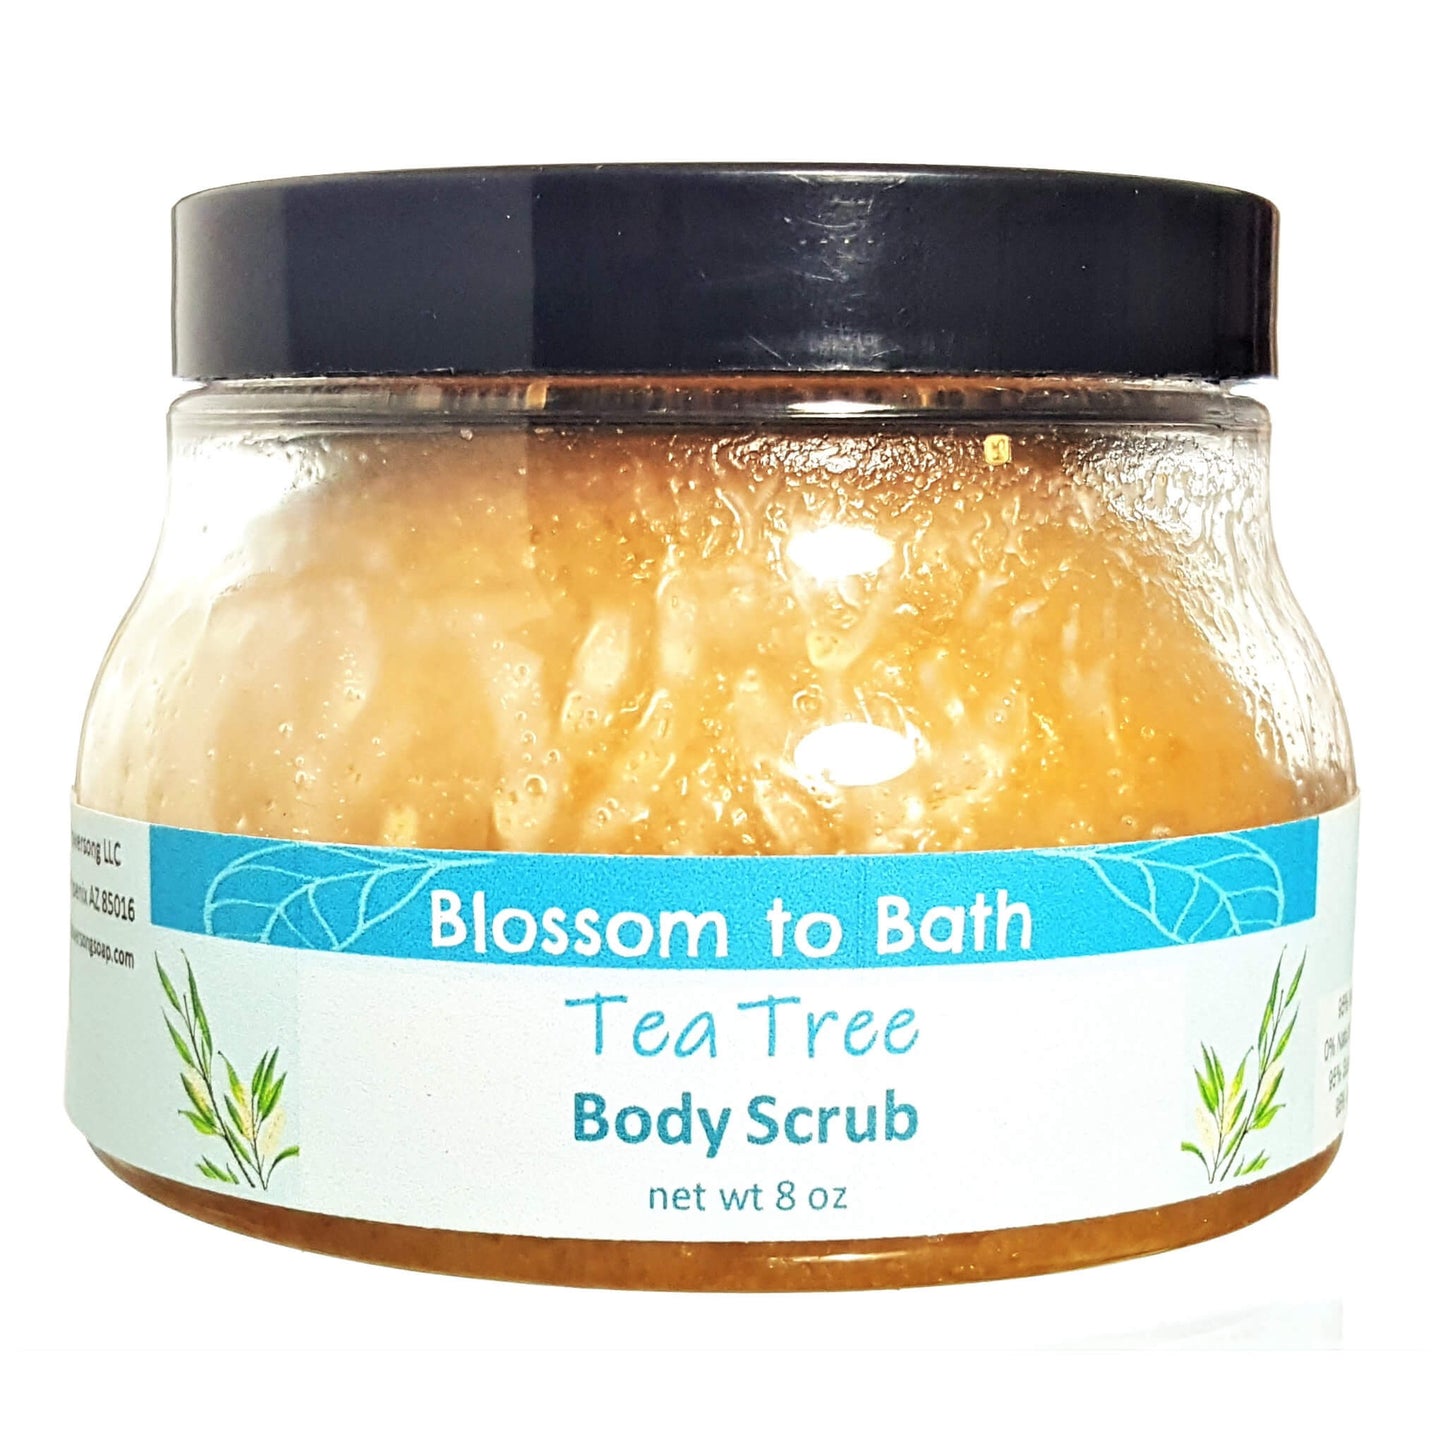 Buy Blossom to Bath Tea Tree Body Scrub from Flowersong Soap Studio.  Large crystal turbinado sugar plus luxury rich oils conveniently exfoliate and moisturize in one step  Tea tree's fresh fragrance embodies a deep down clean.